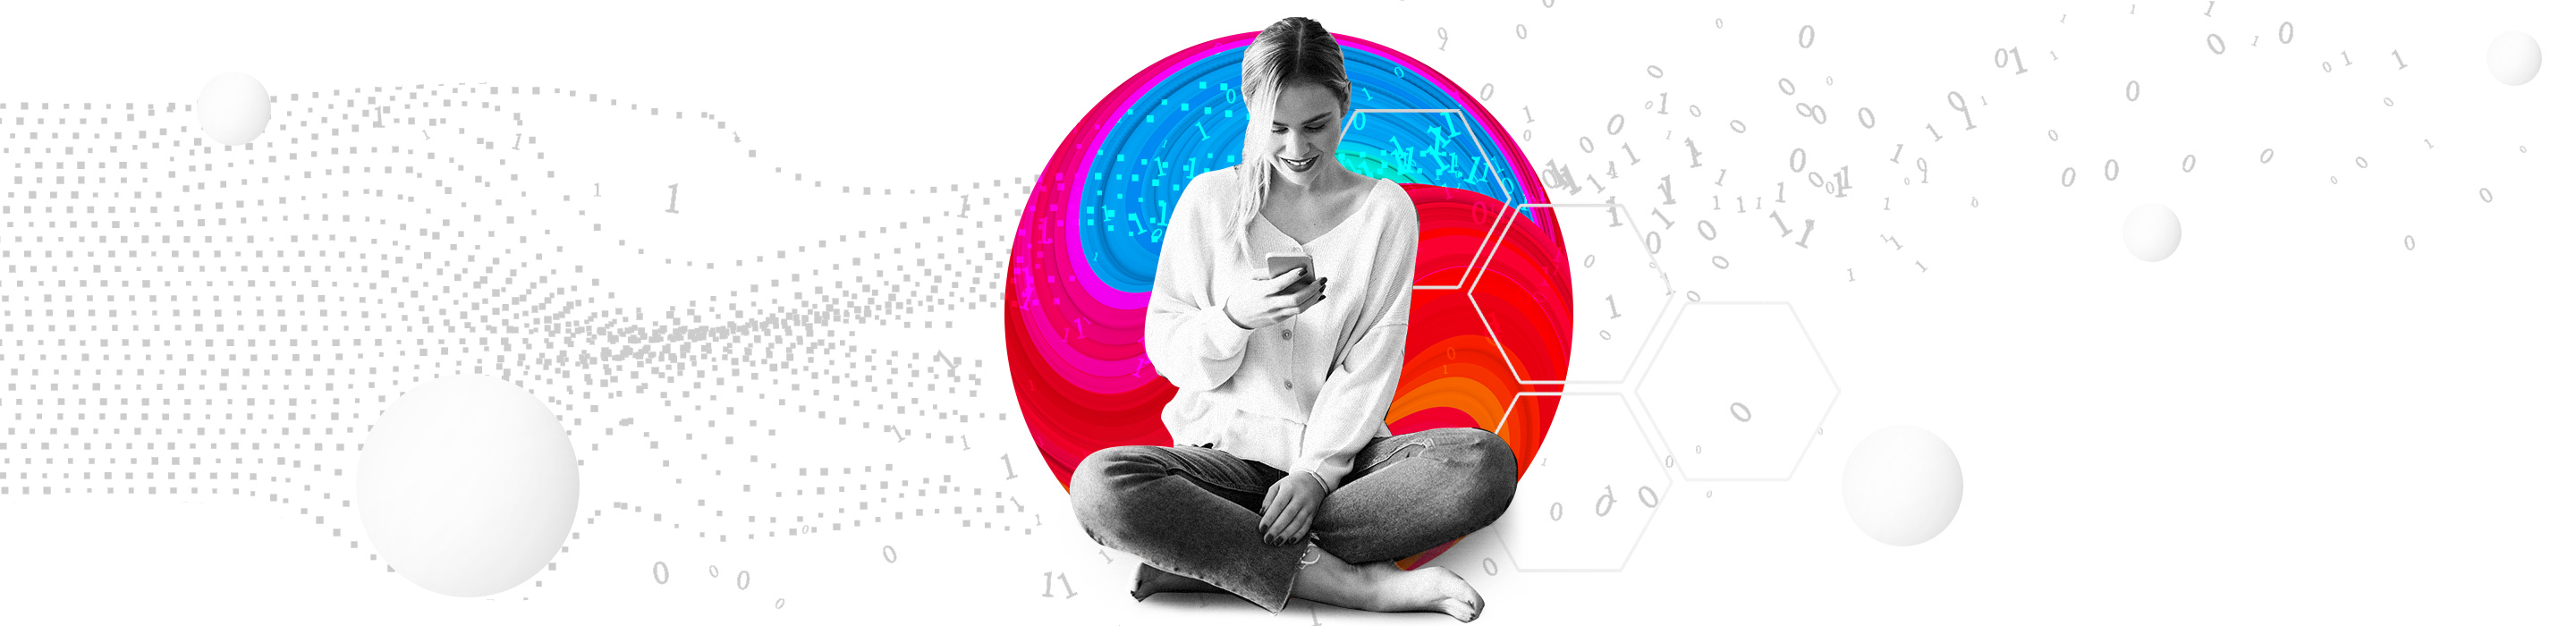 Woman sitting down looking at phone with an abstract representation of data.